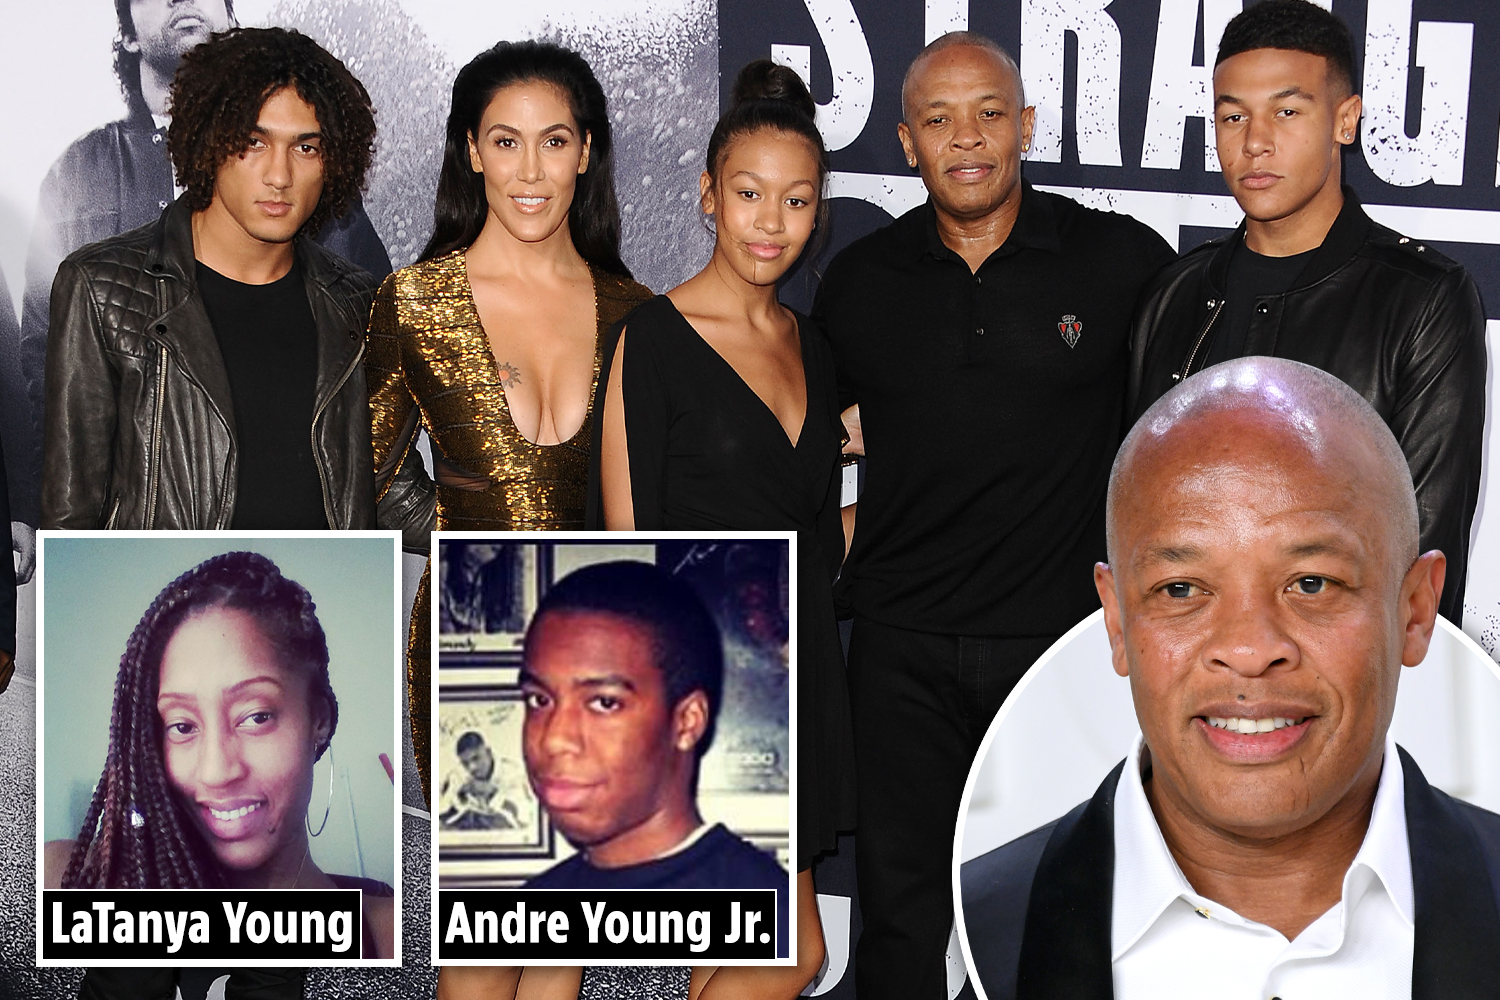 Inside Dr Dre's troubled family with estranged homeless daughter